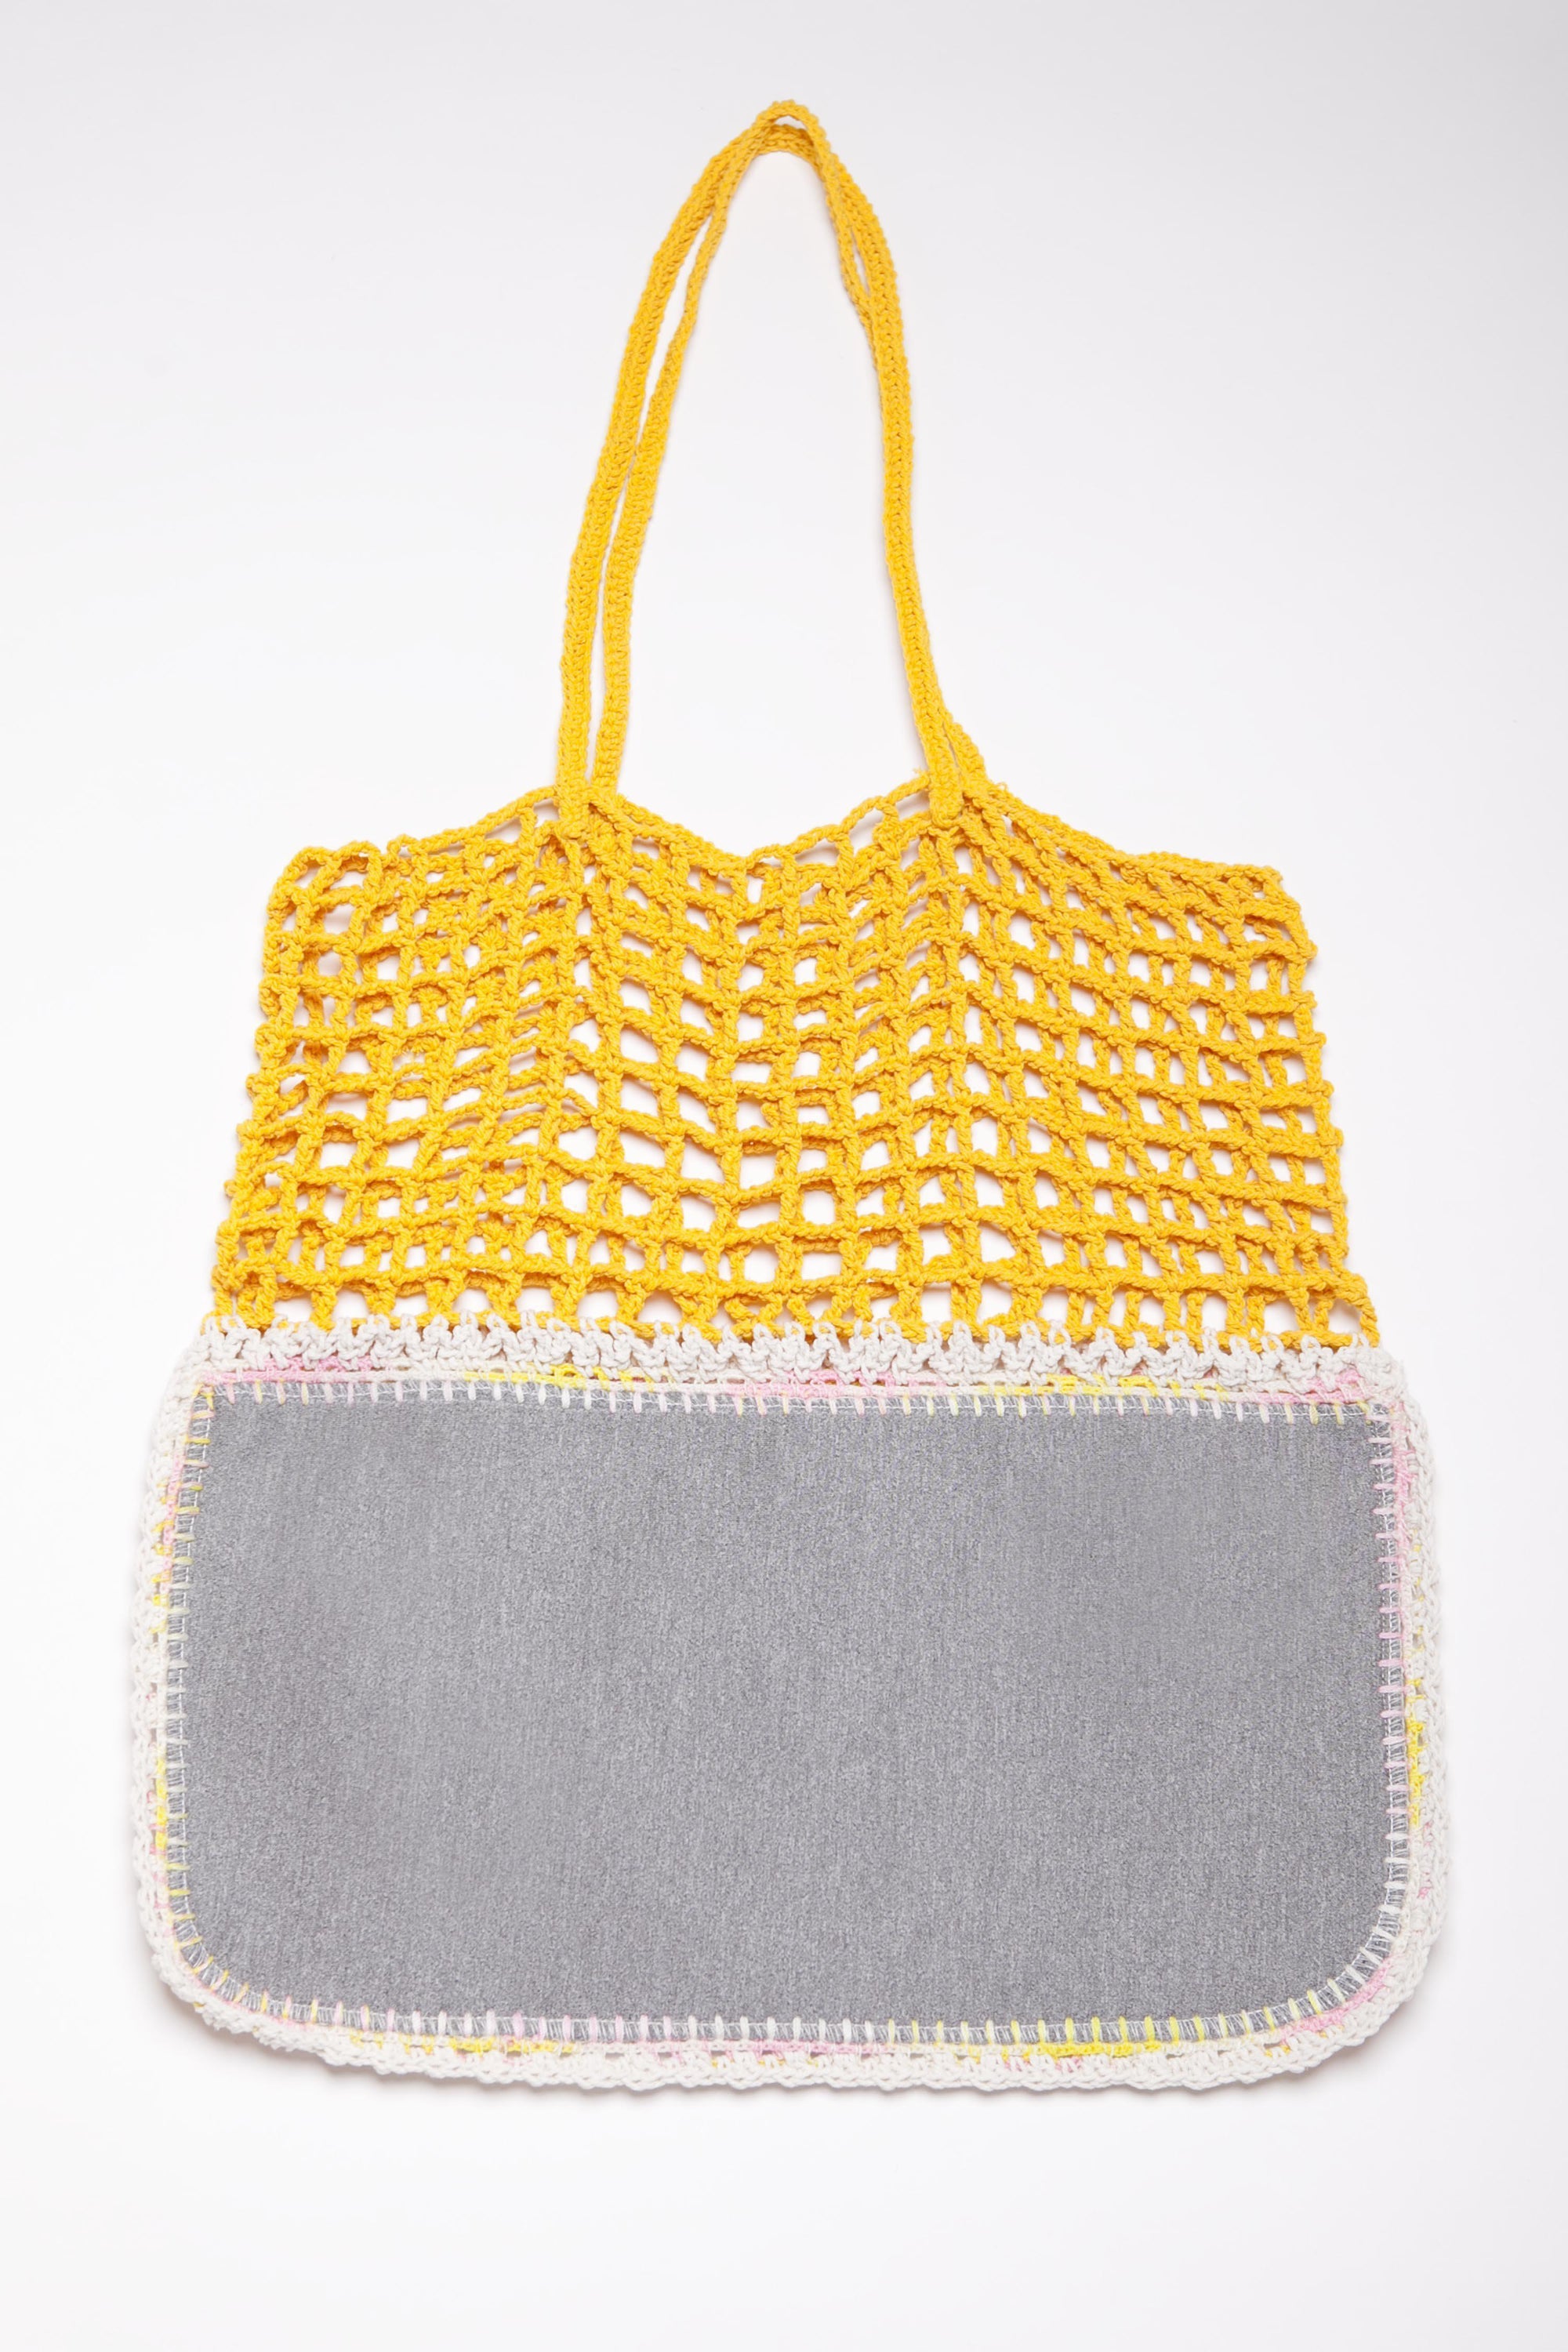 Yellow and Grey Crochet and Neoporene Bag - Handmade for Australia-Merrymetric Bags-Temples and Markets